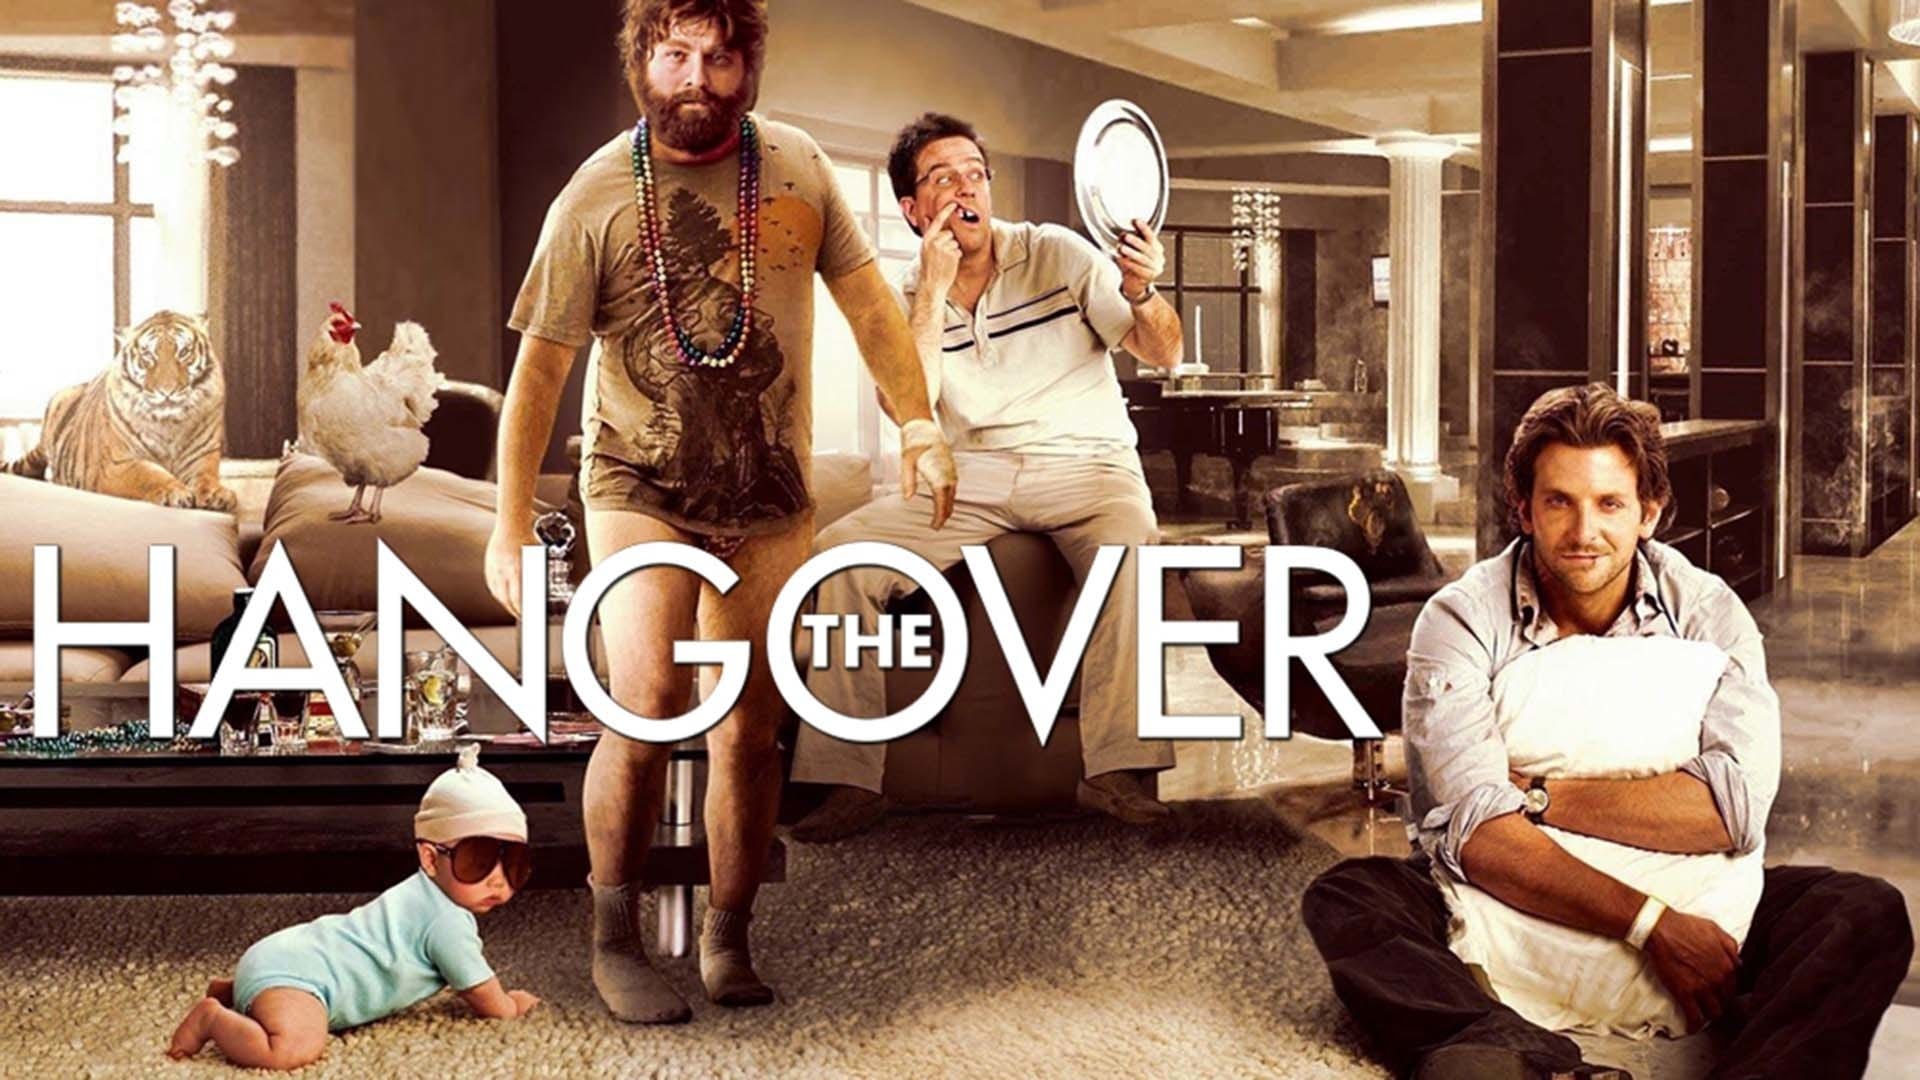 Watch The Hangover (2009) Movies Online - soap2day - putlockers.